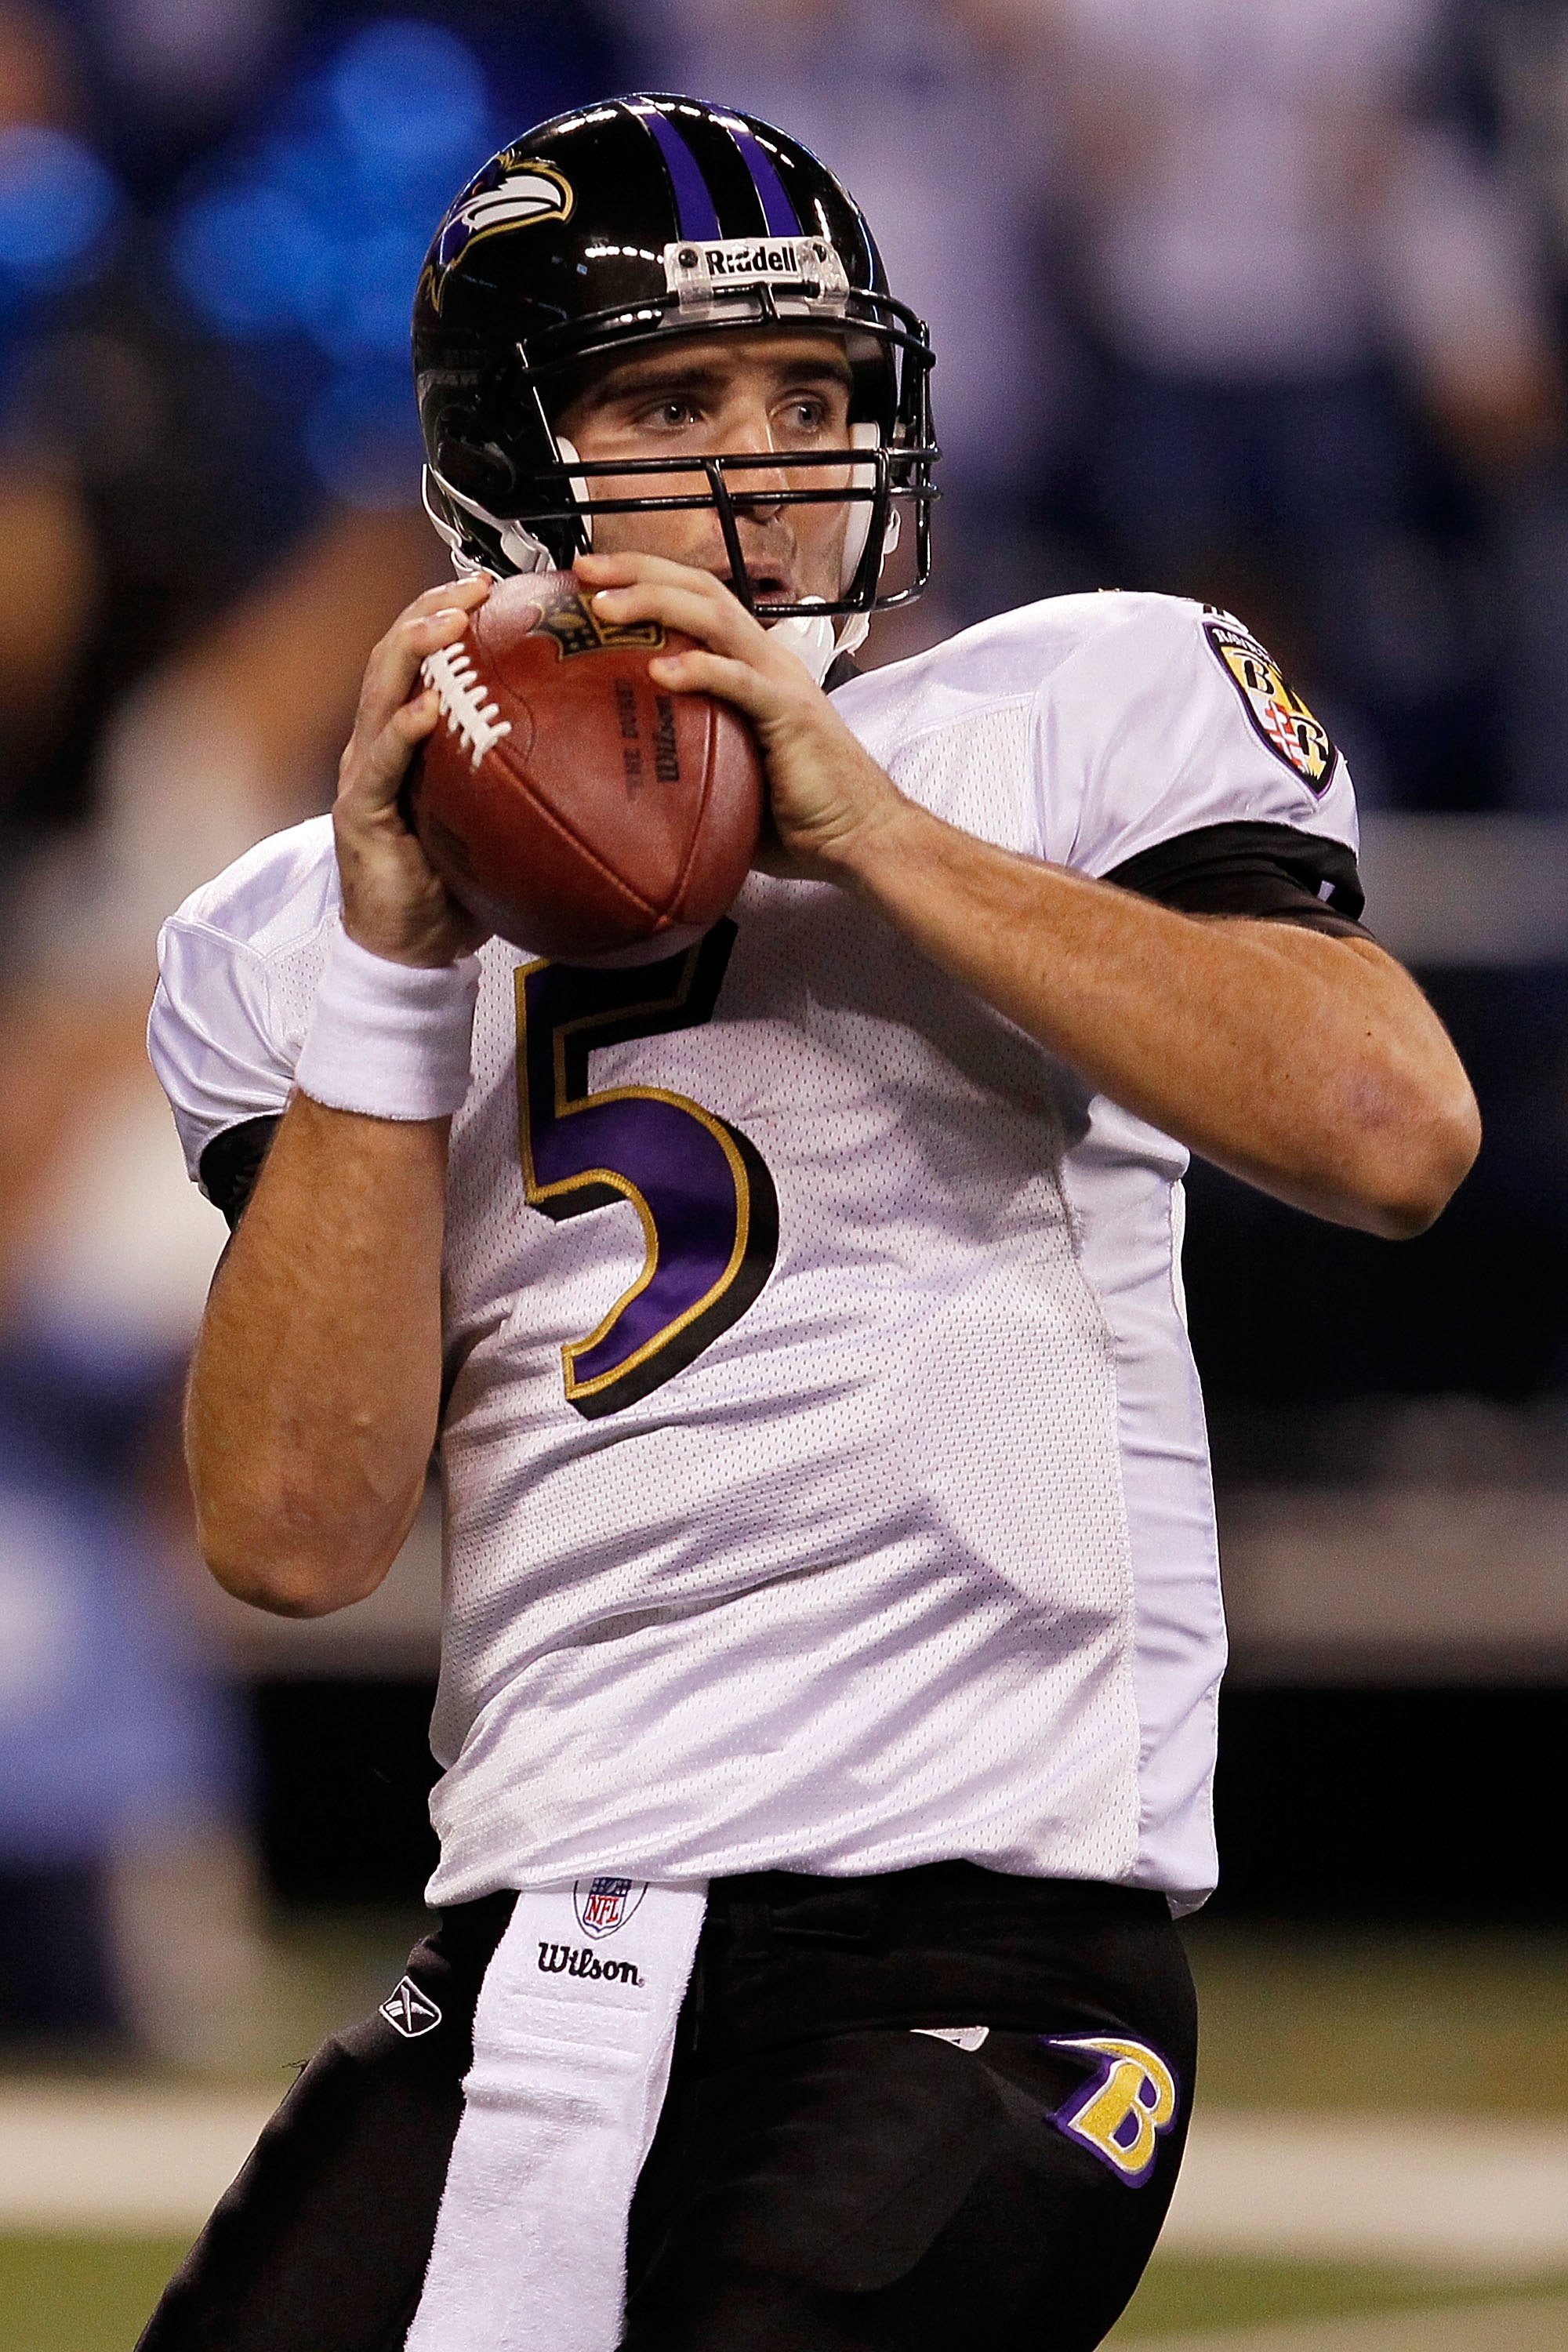 INDIANAPOLIS - JANUARY 16:  Quarterback Joe Flacco #5 of the Baltimore Ravens throws the ball against the Indianapolis Colts in the AFC Divisional Playoff Game at Lucas Oli Stadium on January 16, 2010 in Indianapolis, Indiana.  (Photo by Jonathan Daniel/G